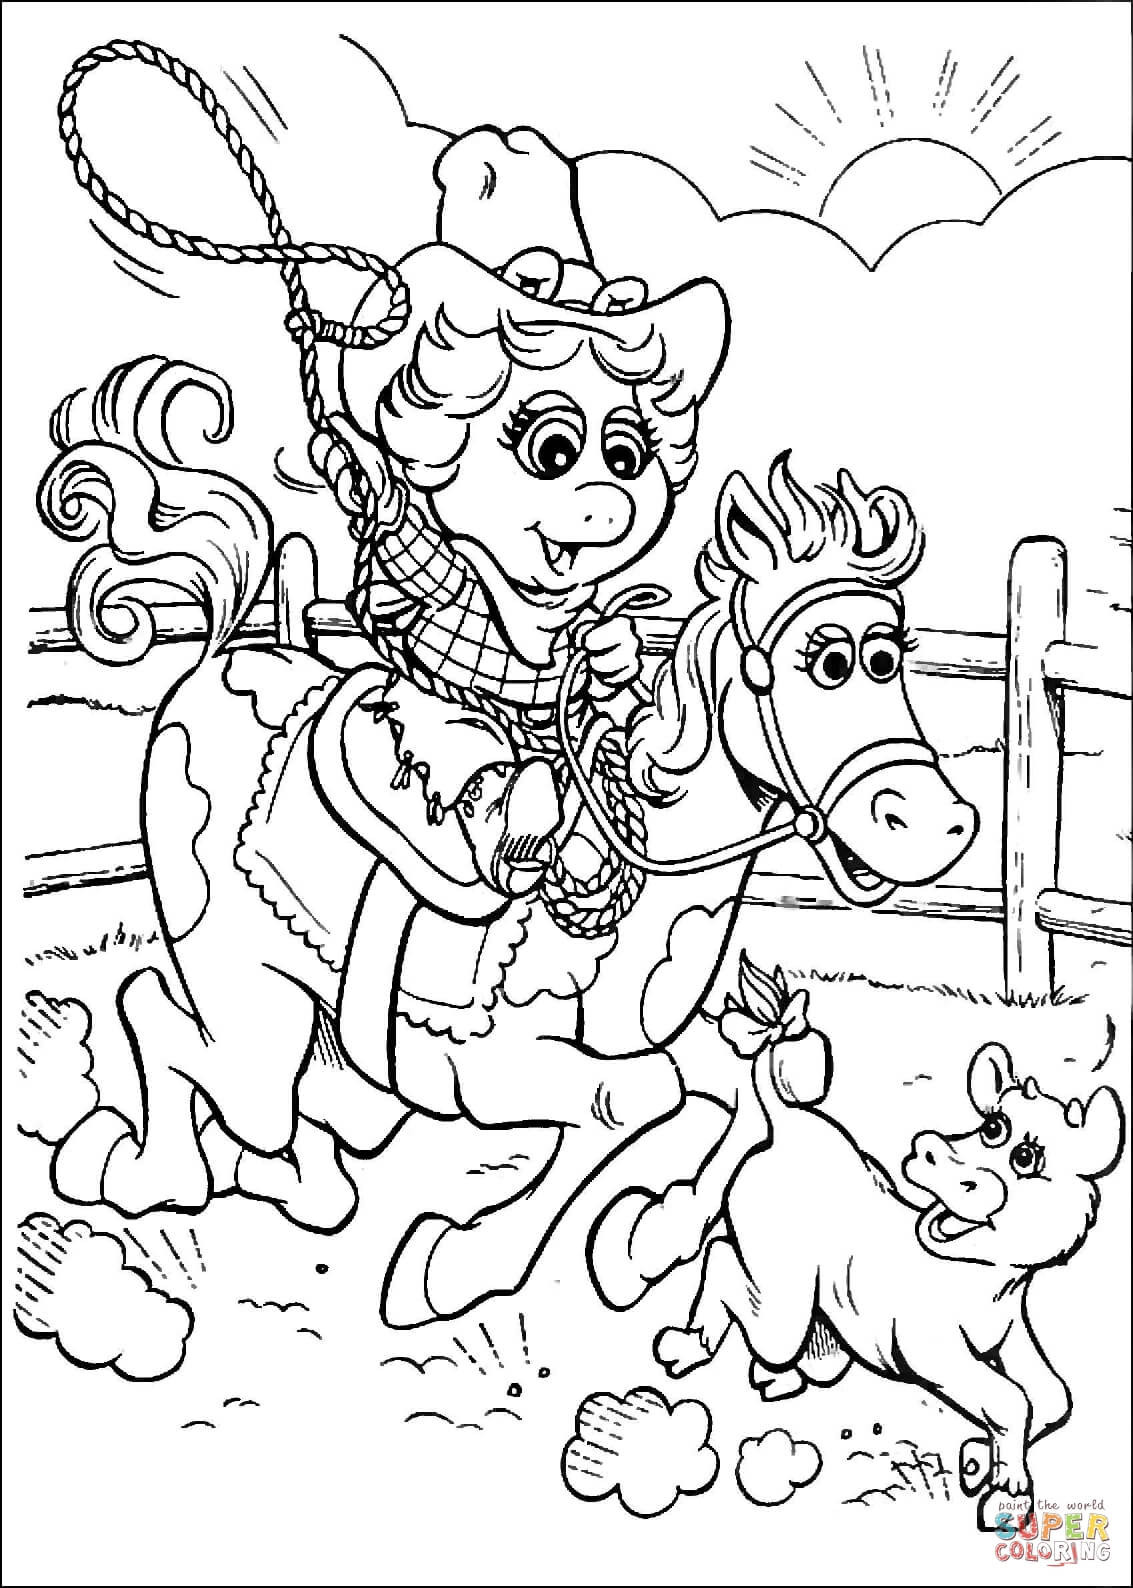 Cowgirl On A Horse Coloring Pages
 Baby Miss Piggy cowgirl coloring page